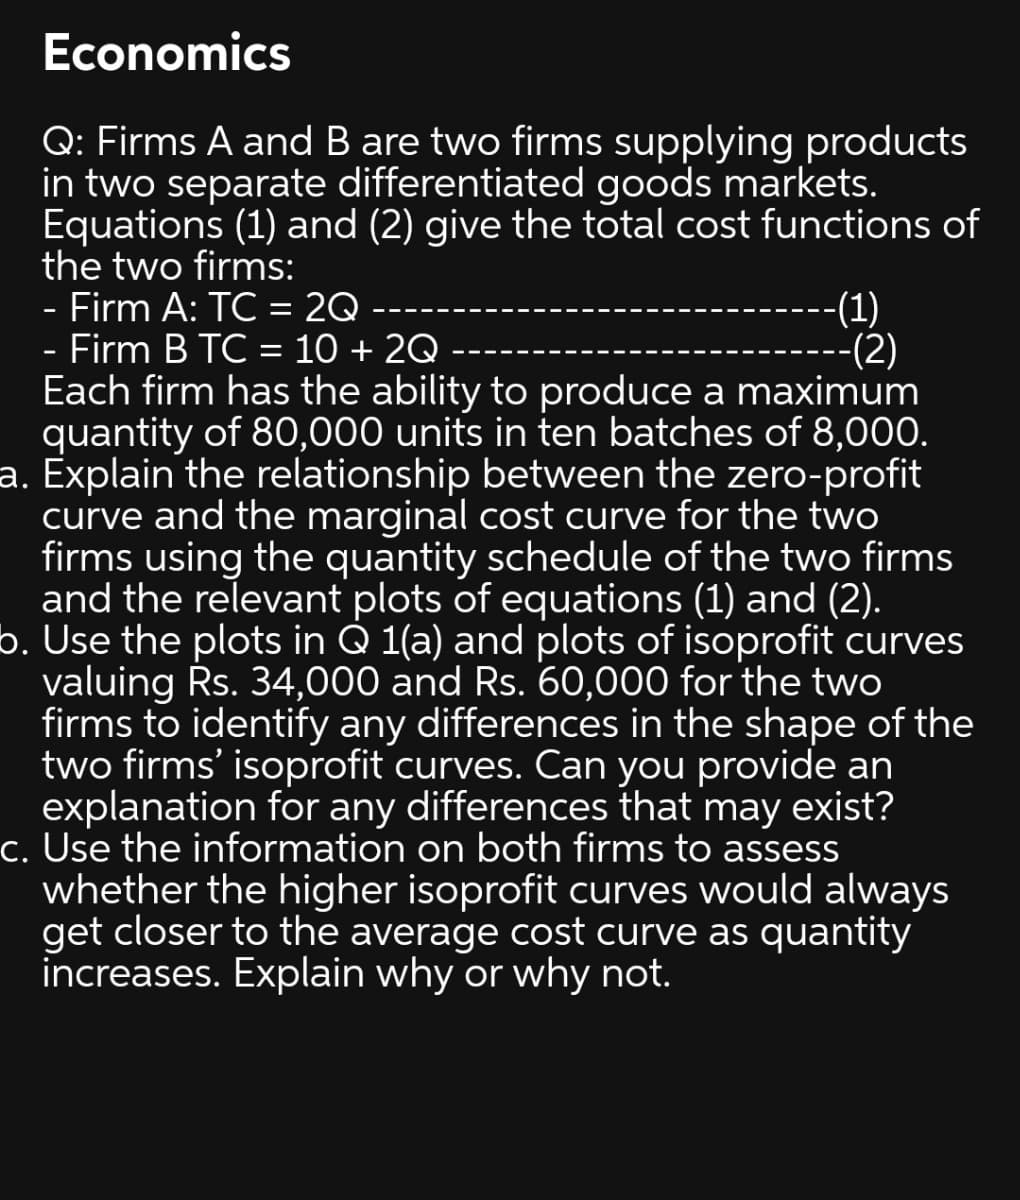 Economics
Q: Firms A and B are two firms supplying products
in two separate differentiated goods markets.
Equations (1) and (2) give the total cost functions of
the two firms:
- Firm A: TC = 2Q
- Firm B TC = 10 + 2Q --
Each firm has the ability to produce a maximum
quantity of 80,000 units in ten batches of 8,000.
a. Explain the relationship between the zero-profit
curve and the marginal cost curve for the two
firms using the quantity schedule of the two firms
and the relevant plots of equations (1) and (2).
b. Use the plots in Q 1(a) and plots of isoprofit curves
valuing Rs. 34,000 and Rs. 60,000 for the two
firms to identify any differences in the shape of the
two firms' isoprofit curves. Can you provide an
explanation for any differences that may exist?
c. Use the information on both firms to assess
whether the higher isoprofit curves would always
get closer to the average cost curve as quantity
increases. Explain why or why not.
-(1)
---(2)
%3D
